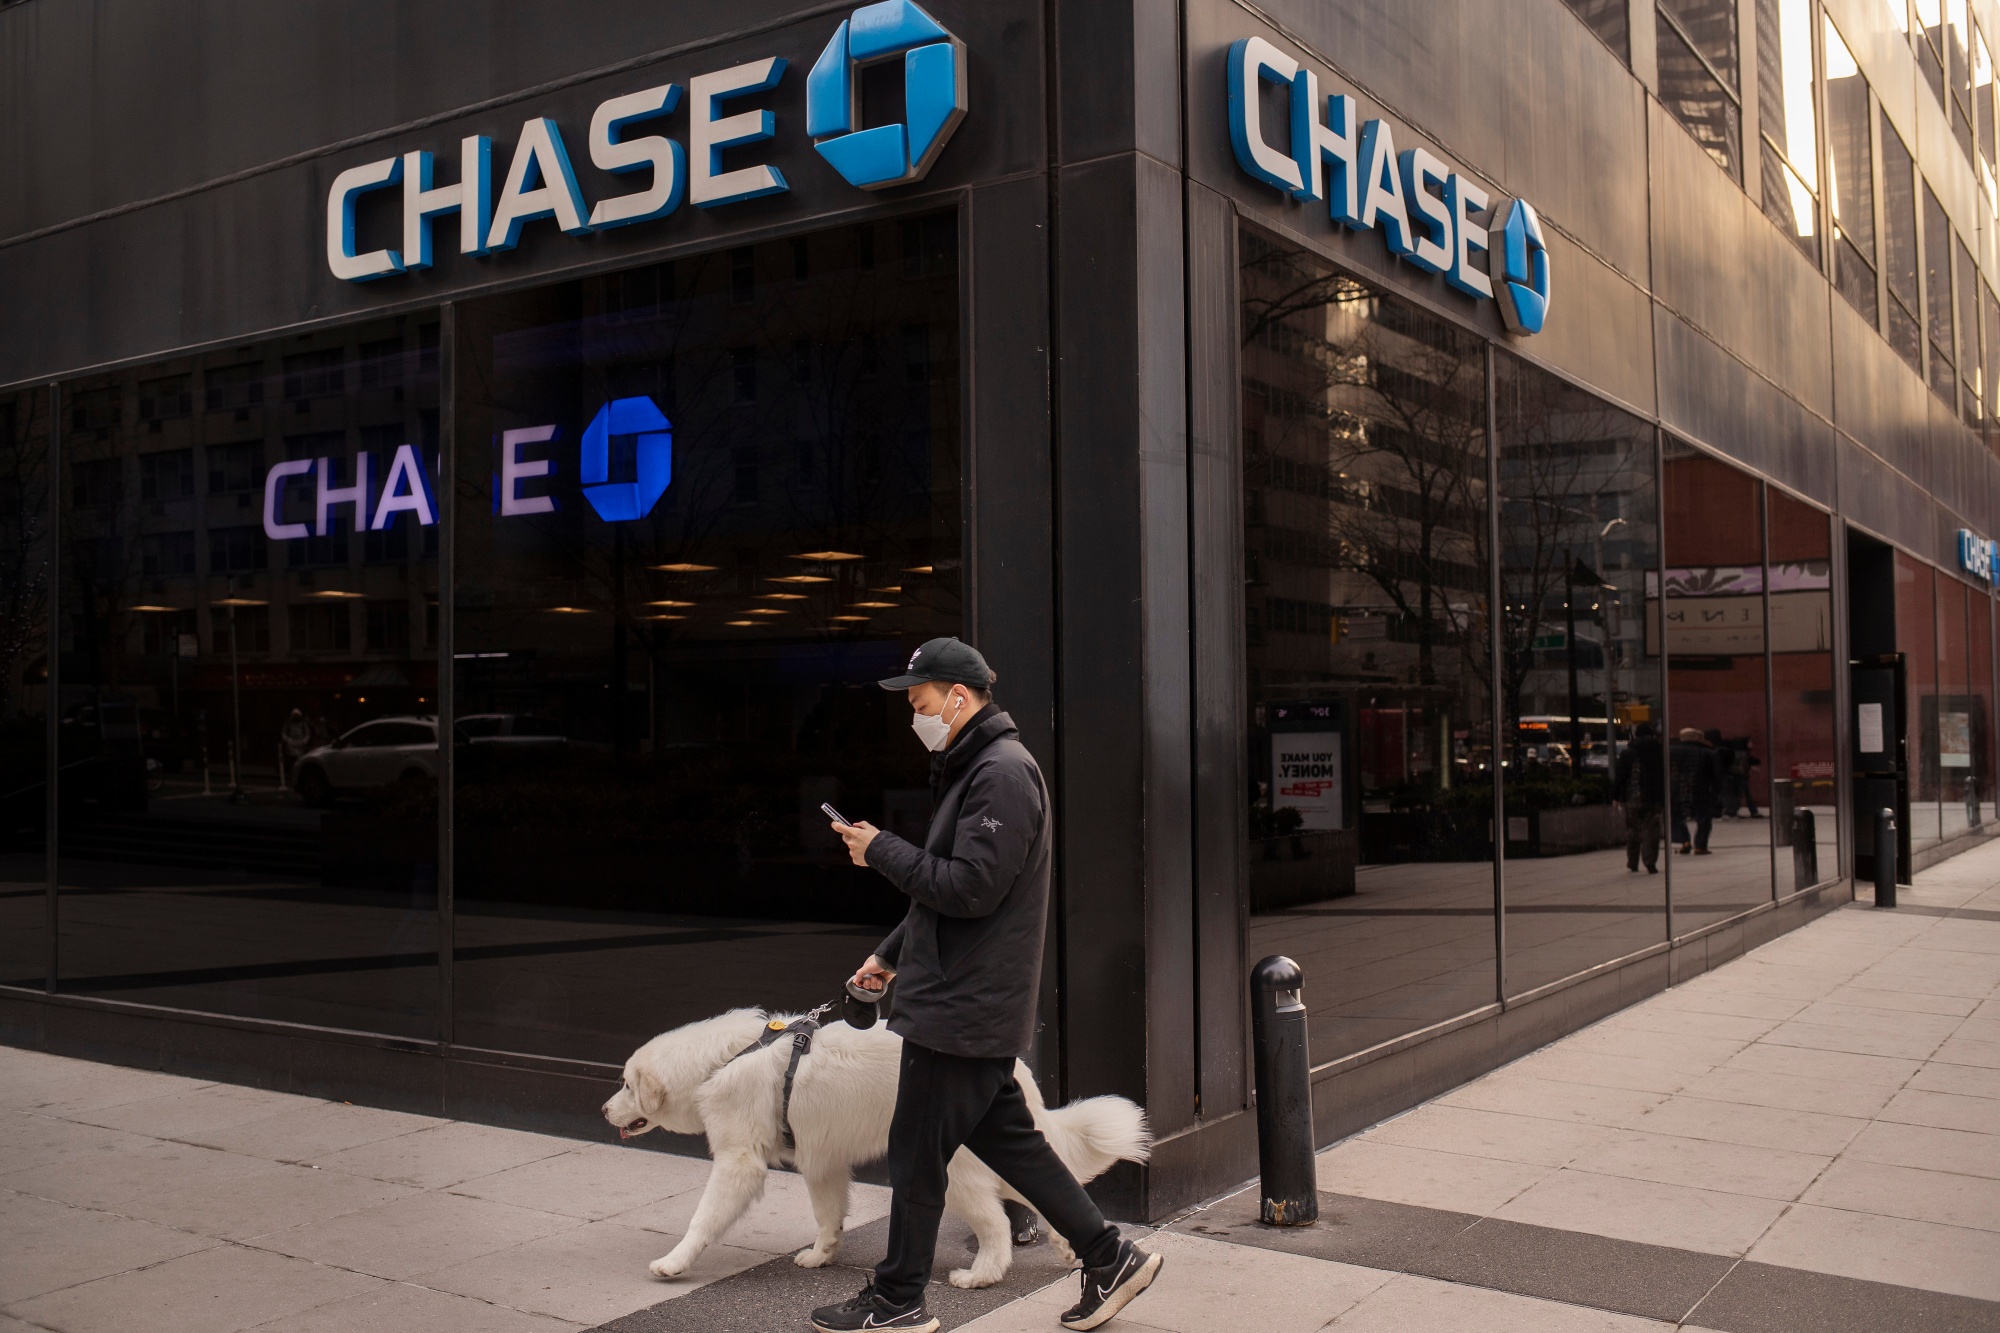 A pedestrian walks past a Chase bank branch in New York on Jan. 13.